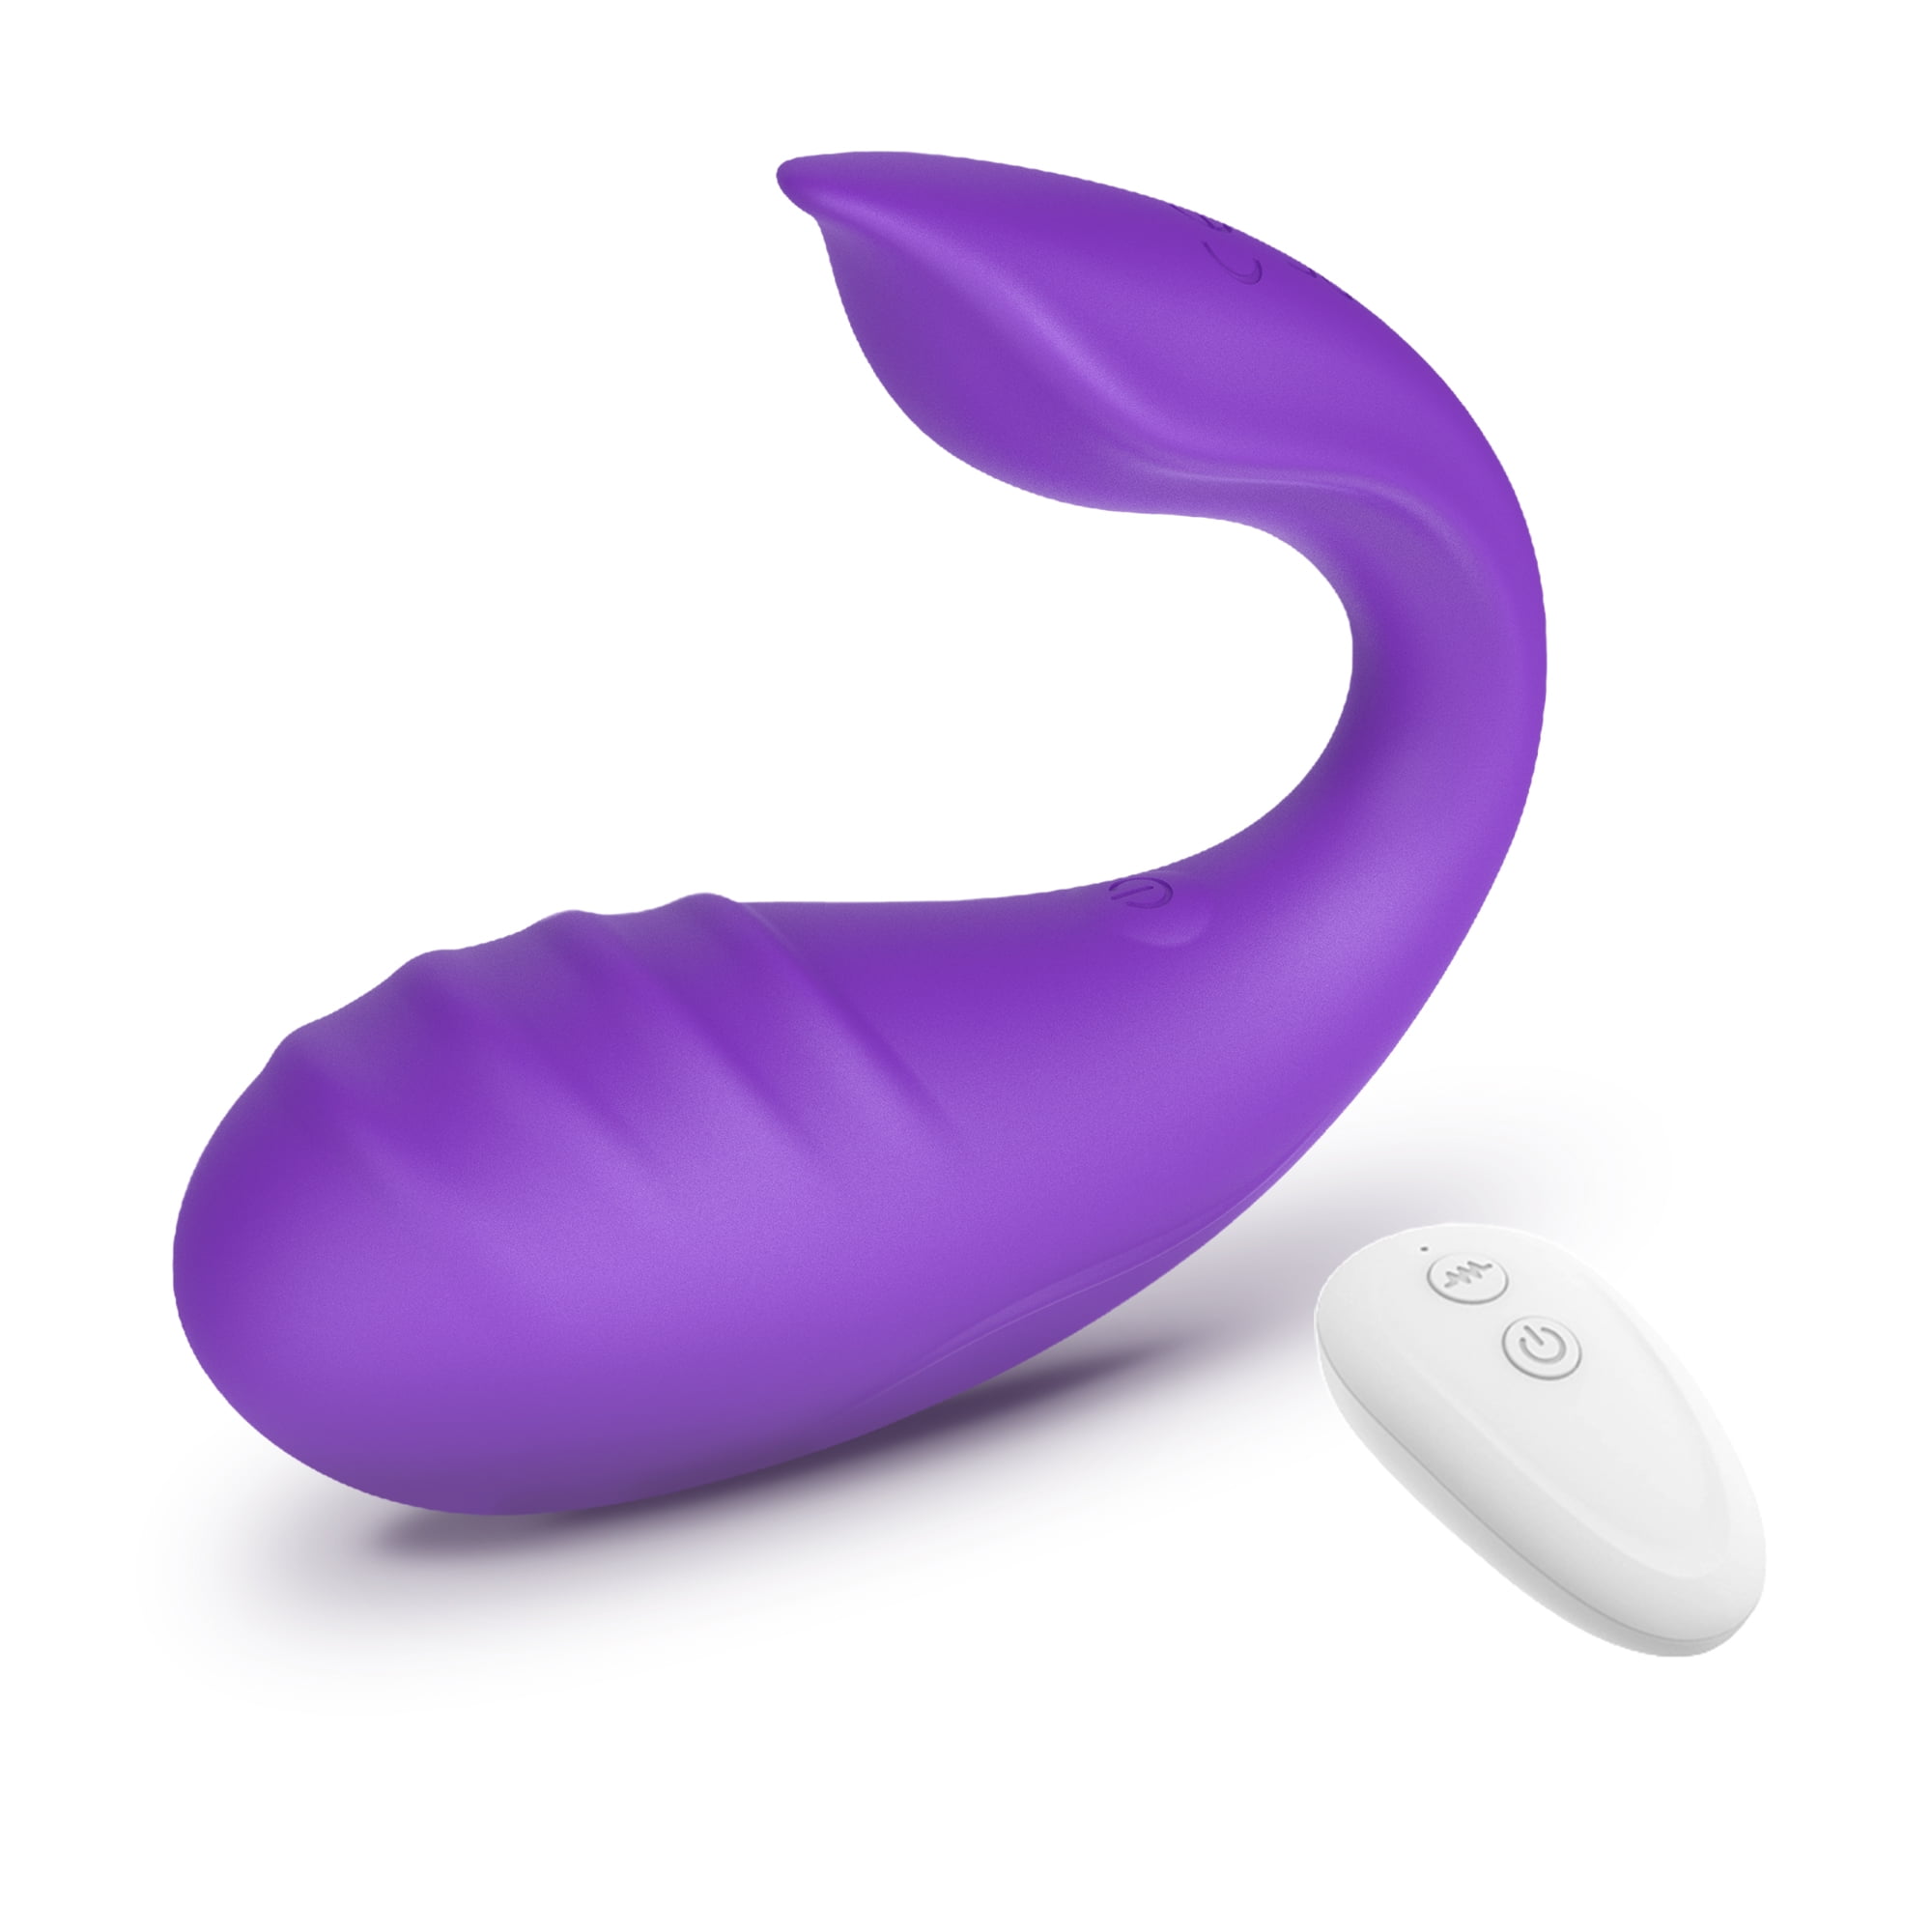 Tracy's Dog Come-Hither Rabbit Sucking Vibrator for Clitoral G Spot  Stimulation, Adult Sex Toys for Women Couple, Vibrating Finger Massager  with 3